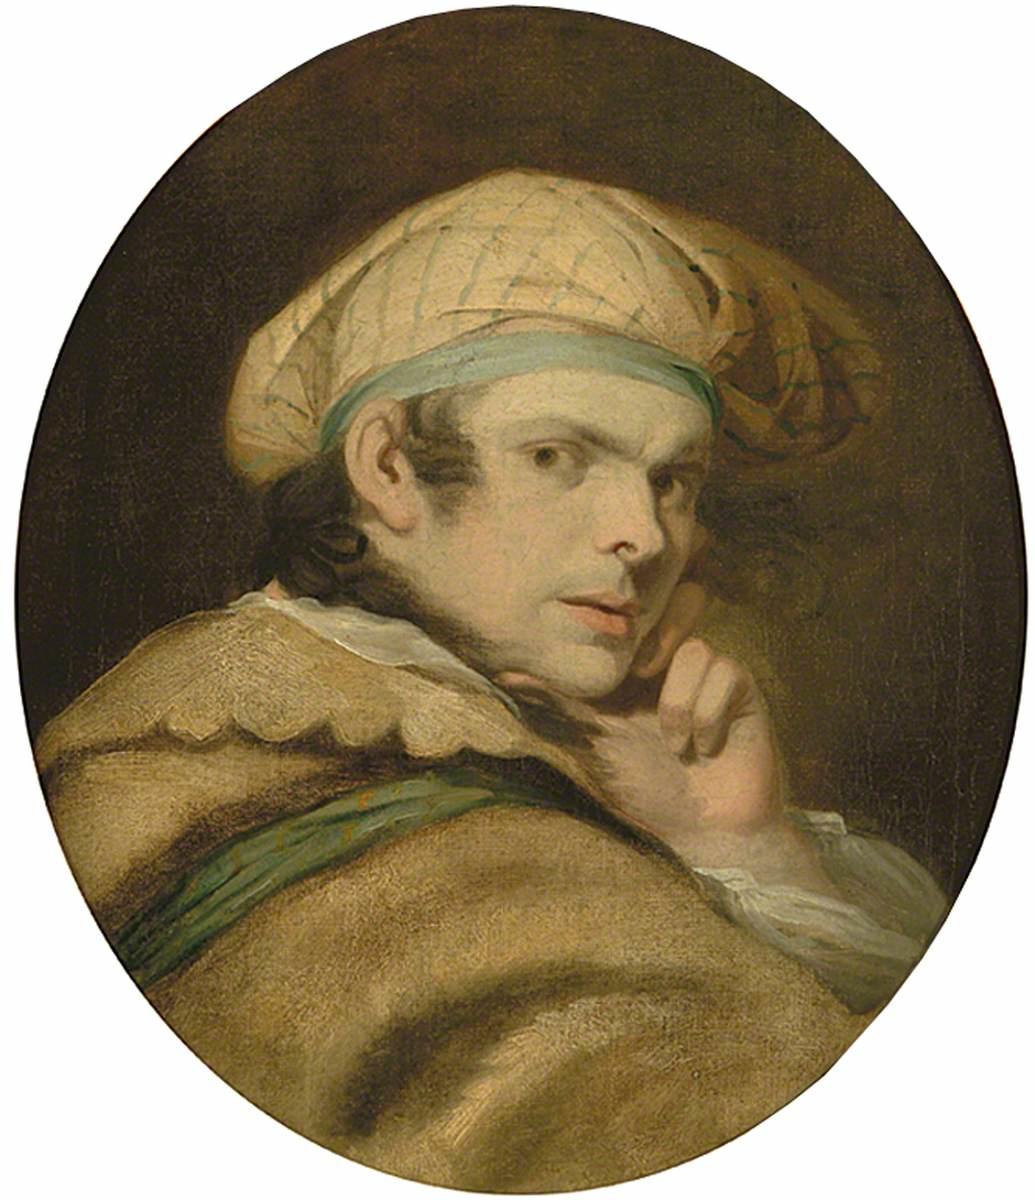 Oval-shaped, bust-length oil portrait of a man. Seen from behind, the man grips his chin as he stares intently over his shoulder at us with brow lightly furrowed.